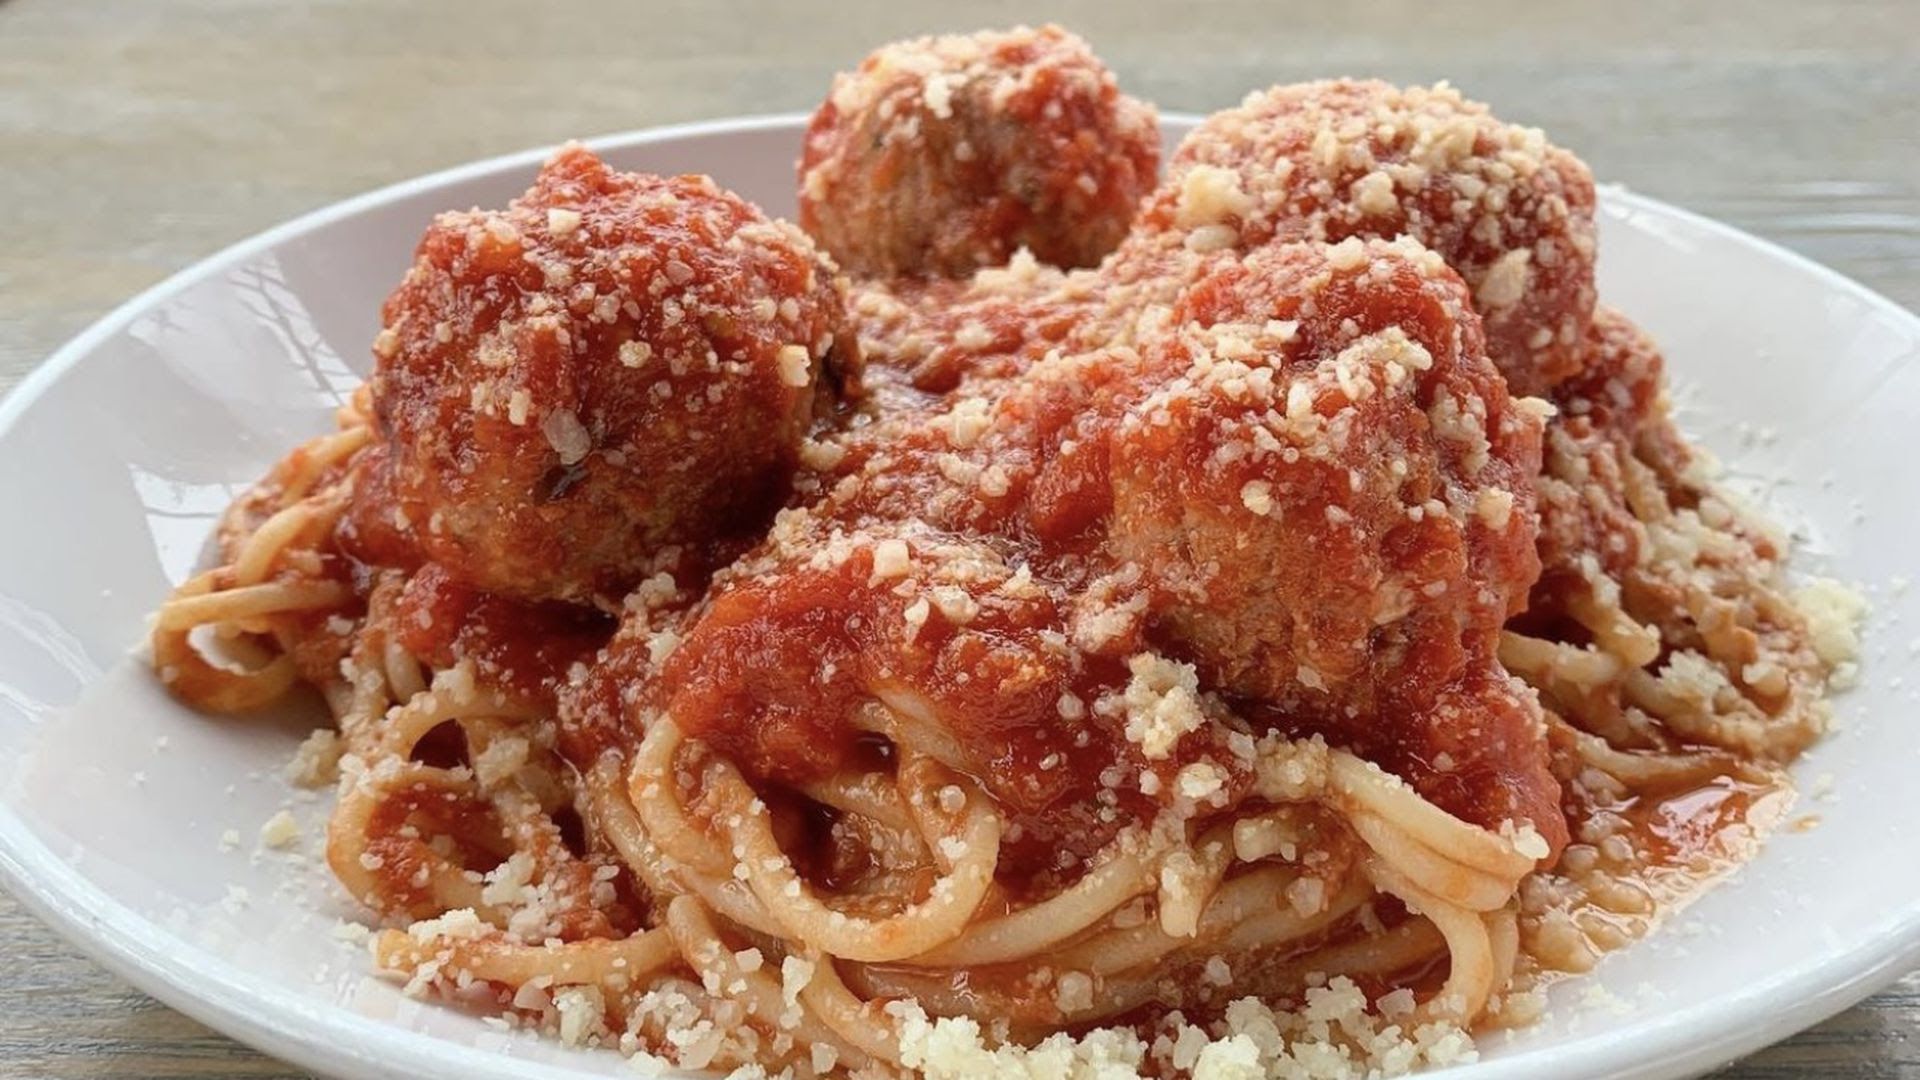 Mama G's meatballs at Nicky's Coal Fired.